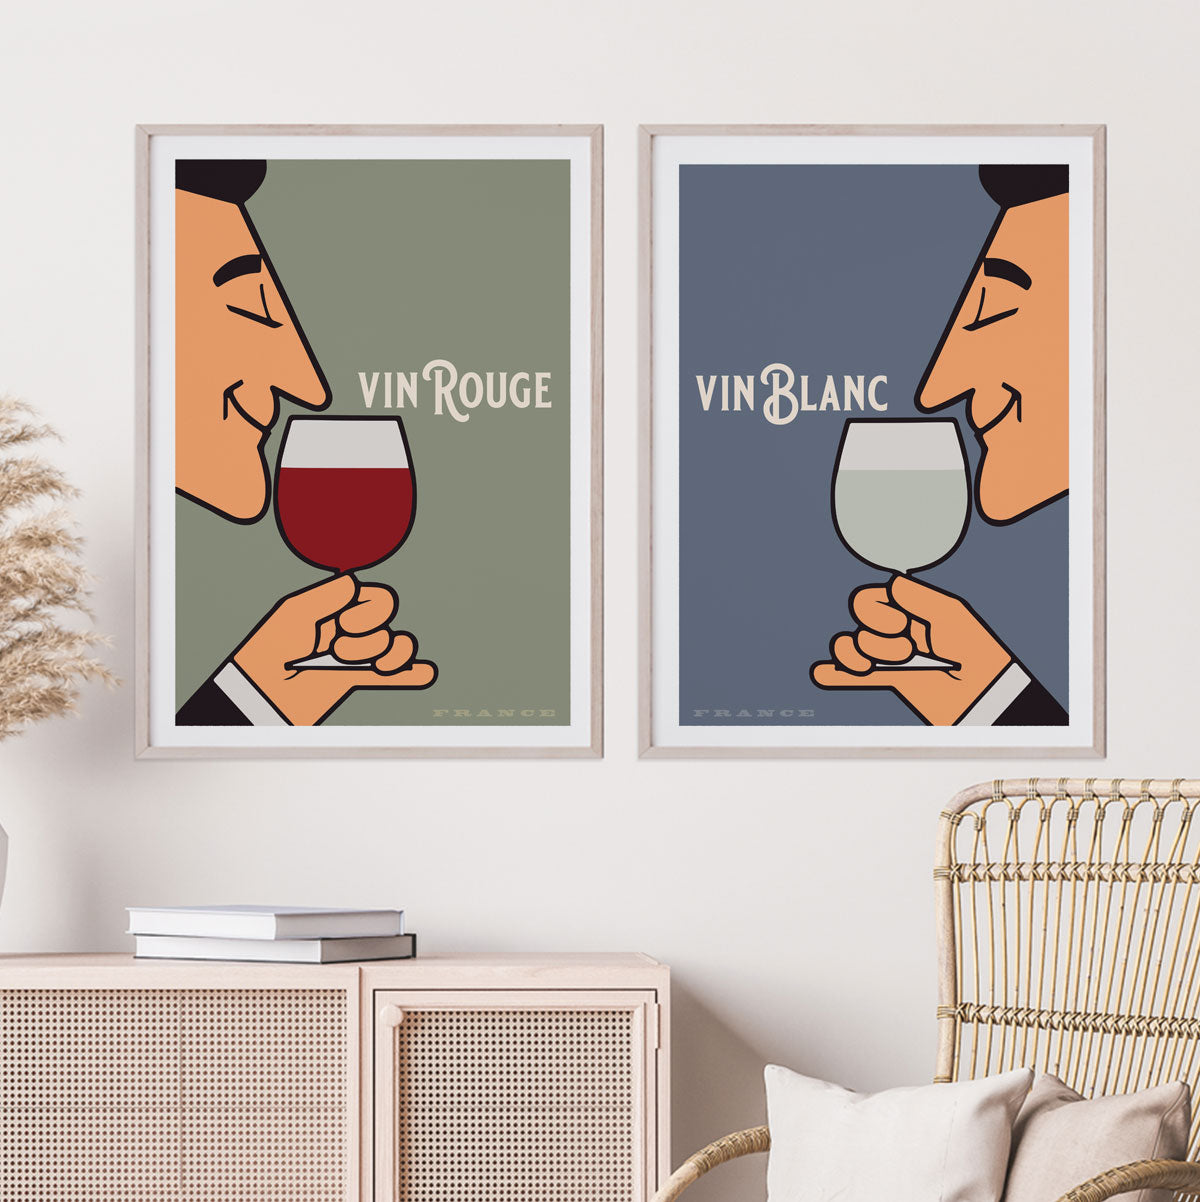 Vin Blanc France vintage retro posters from Places we luv